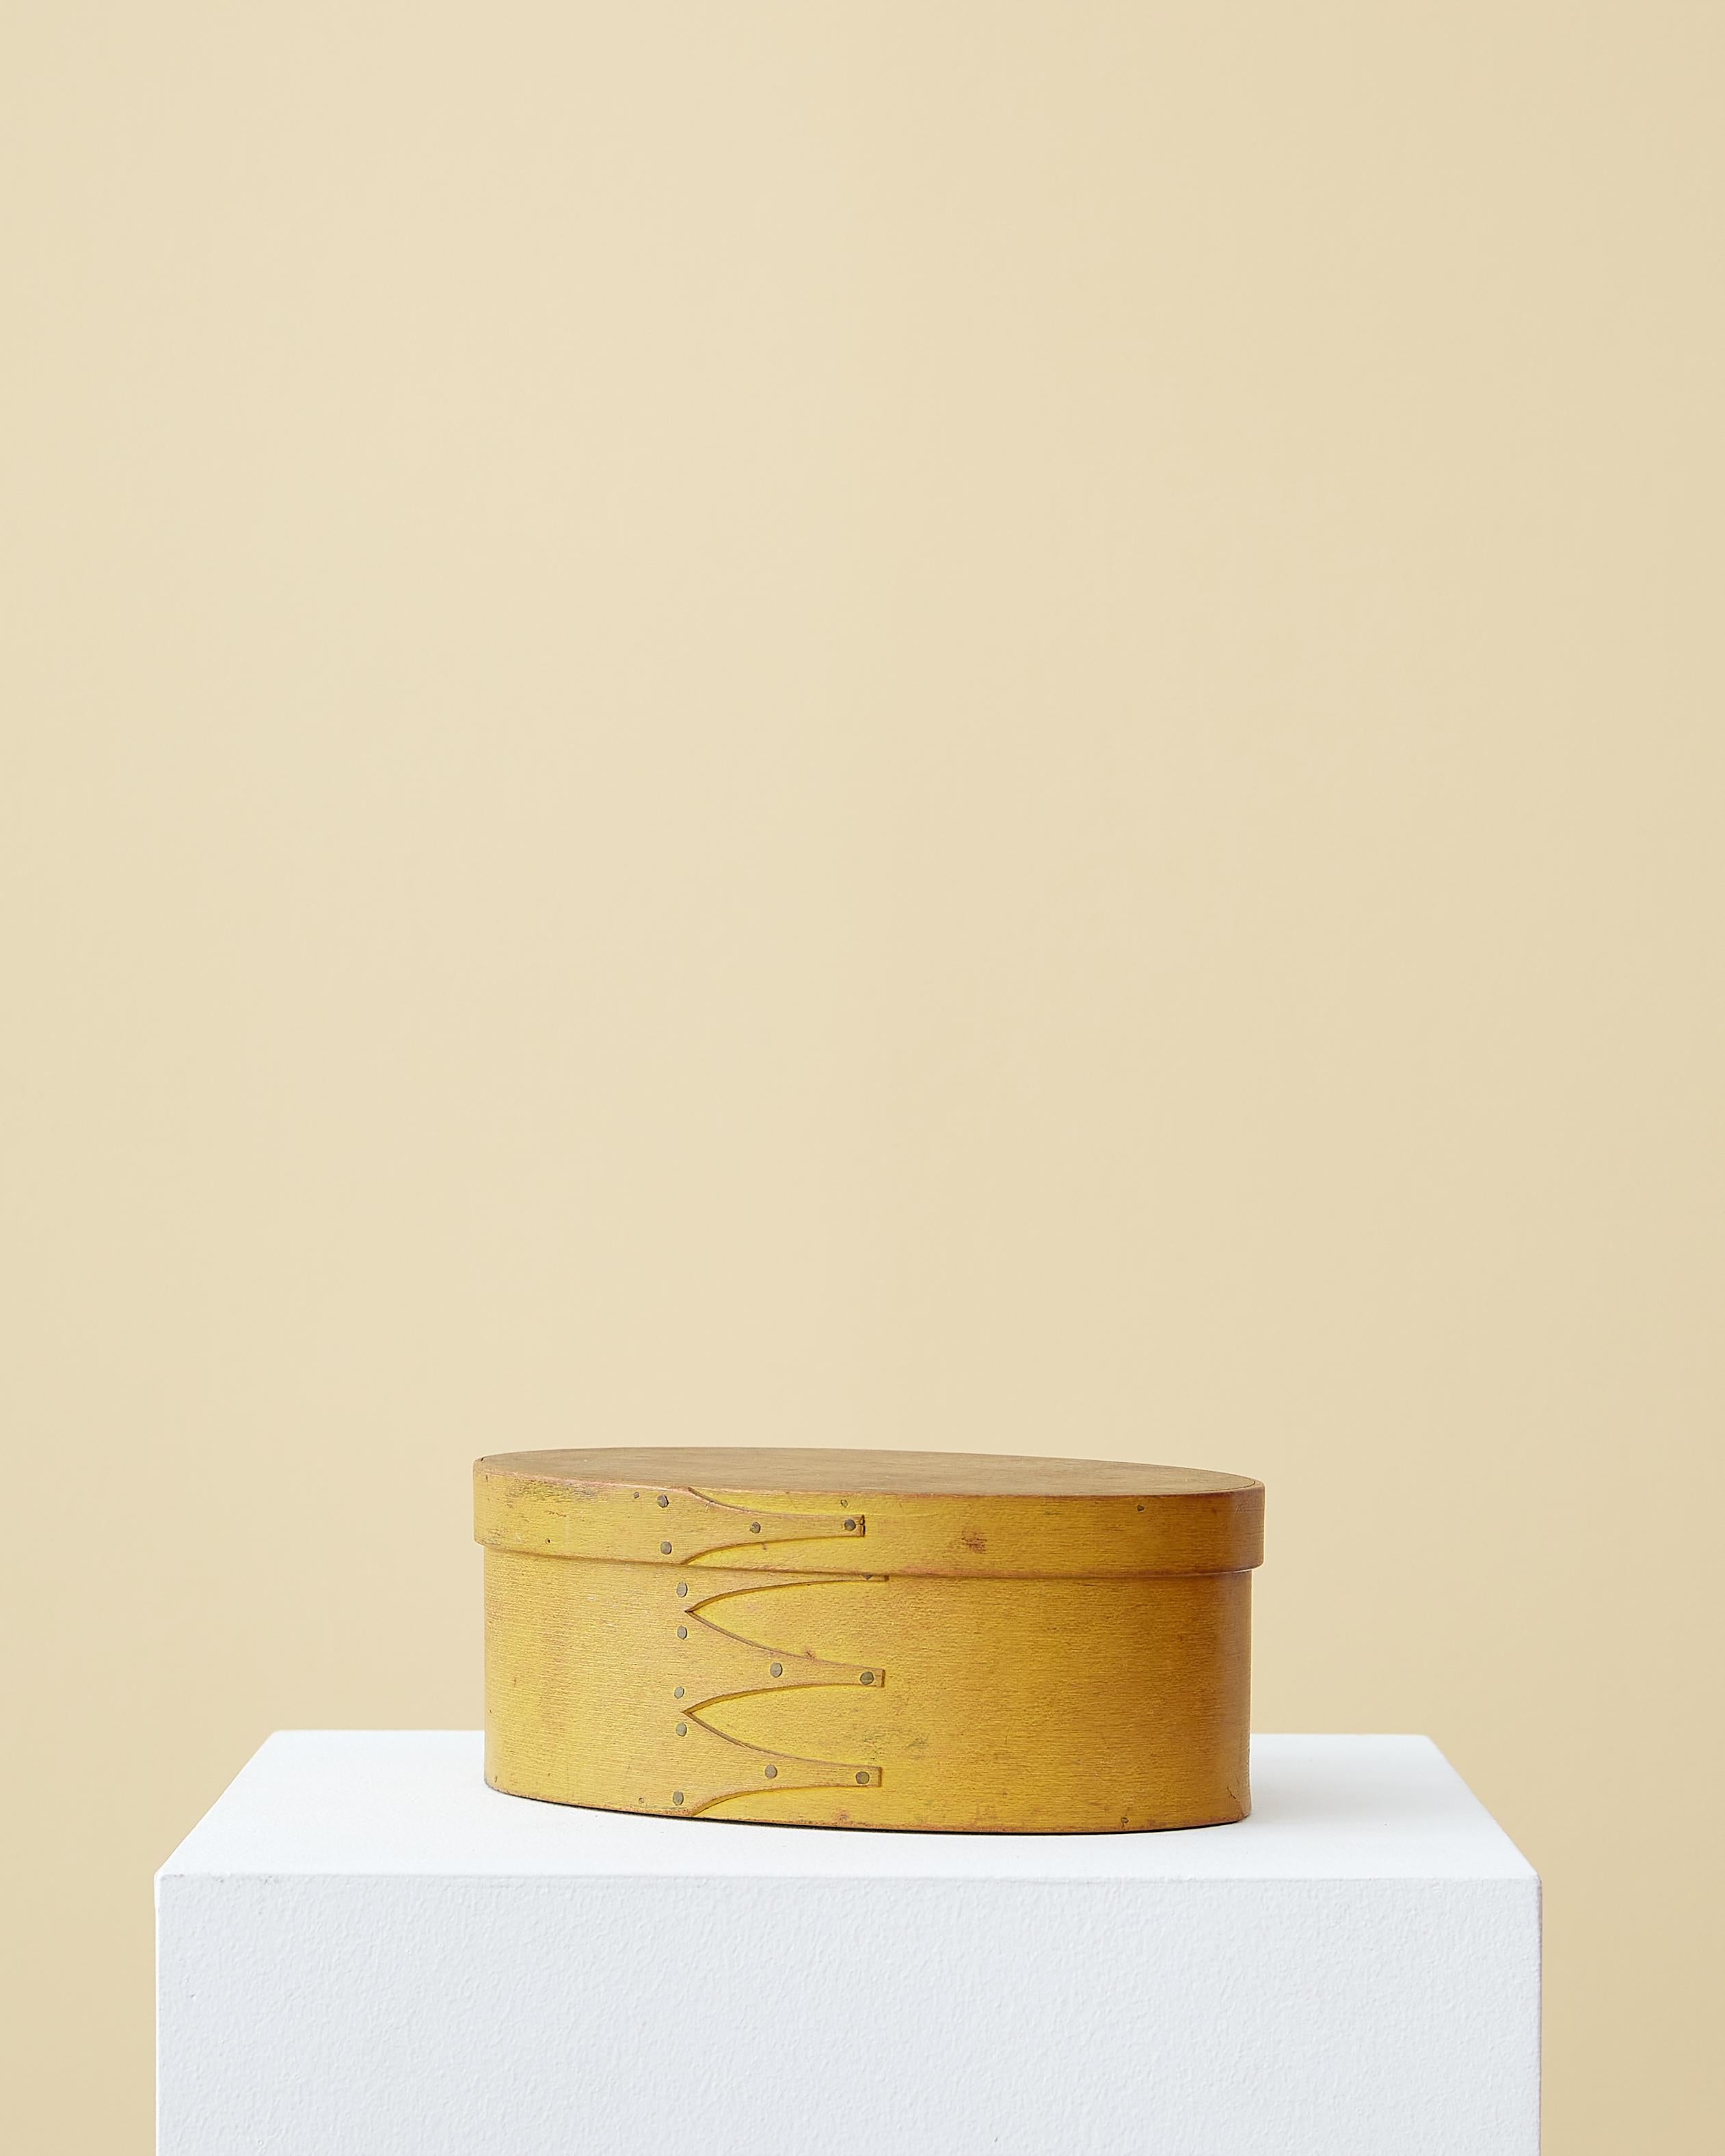 Oval Shaker box in chrome yellow paint with four swallowtail joints. 

Northeastern United States, 19th century. 

Completely original, dry, untouched surface.

Measurements: 3 1/8” height, 8 3/8” length, 5 7/16” depth